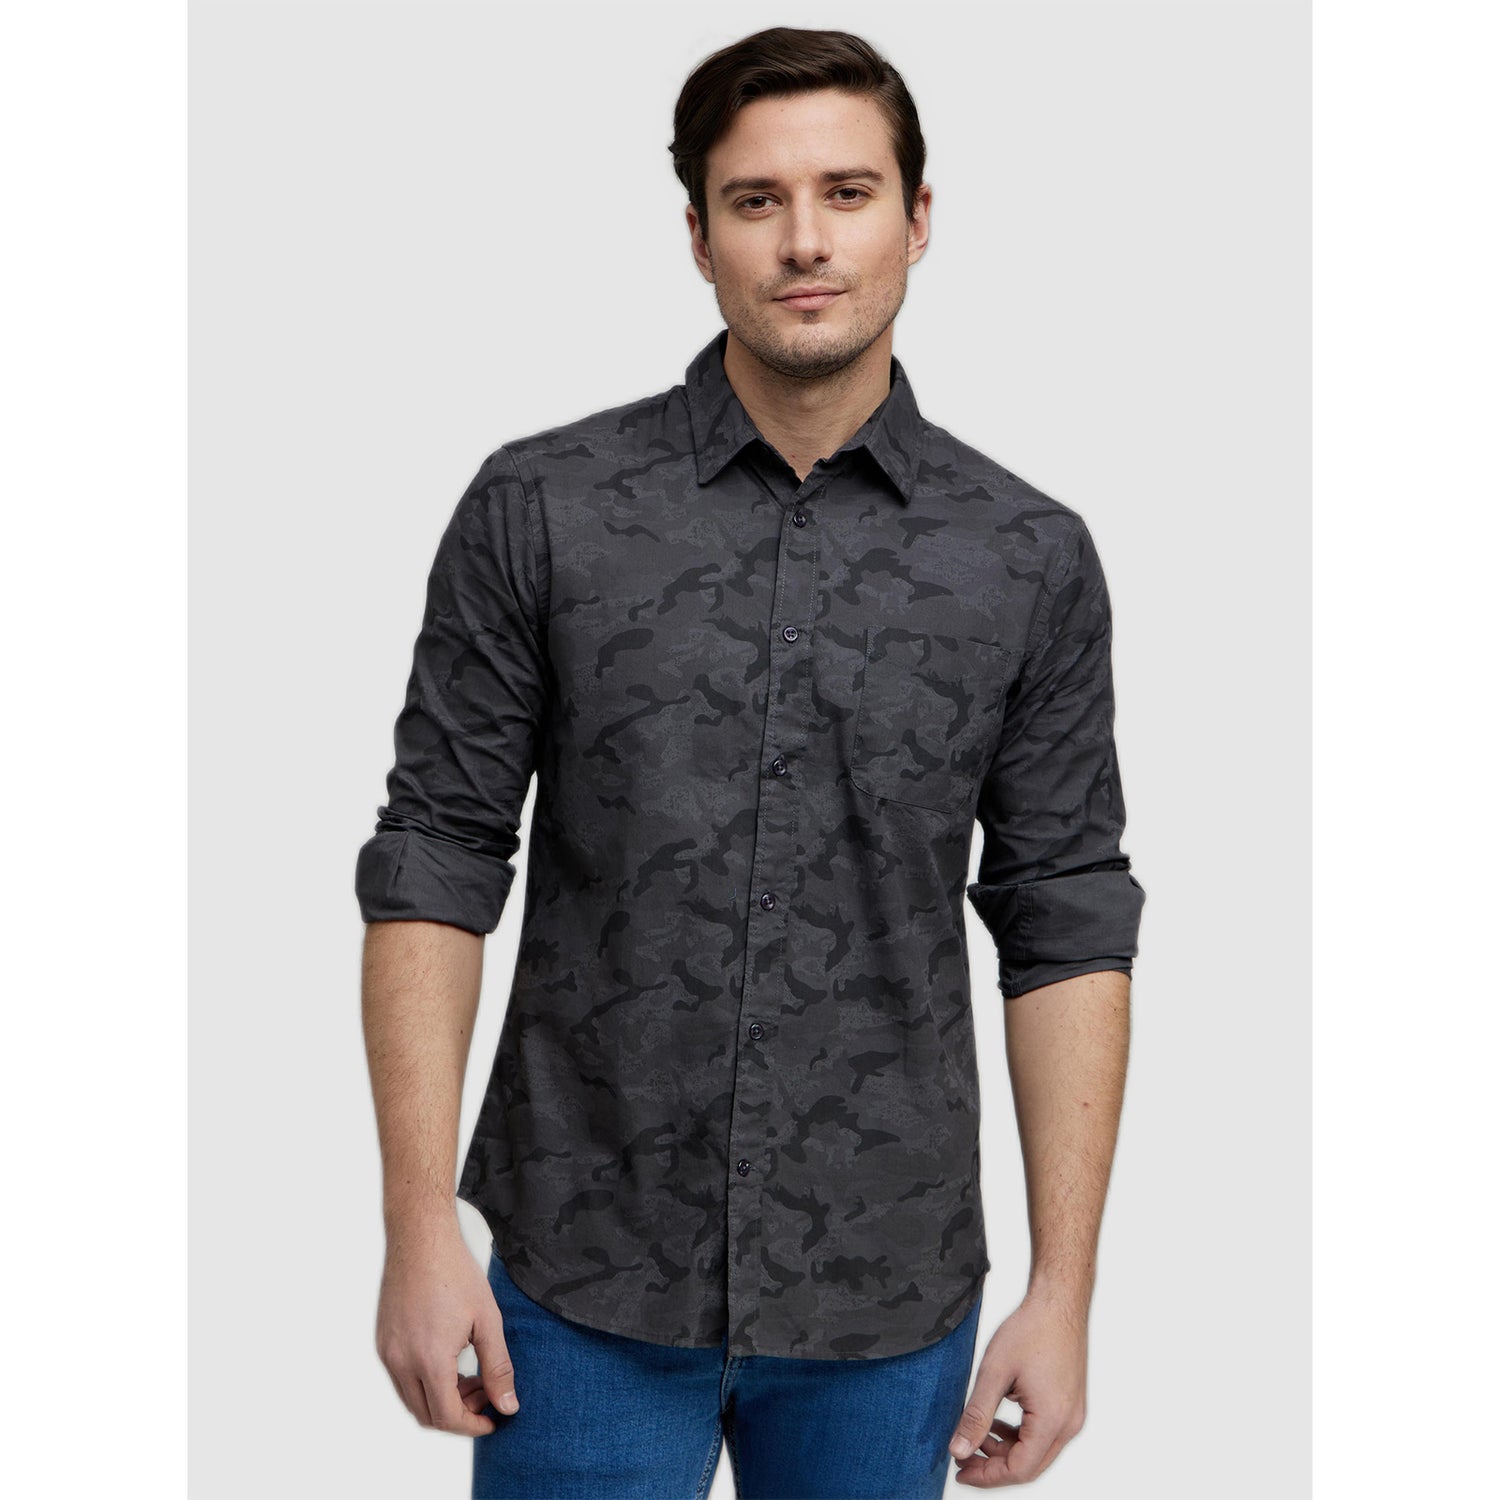 Charcoal Straight Slim Fit Printed Casual Cotton Shirt (CACAM)